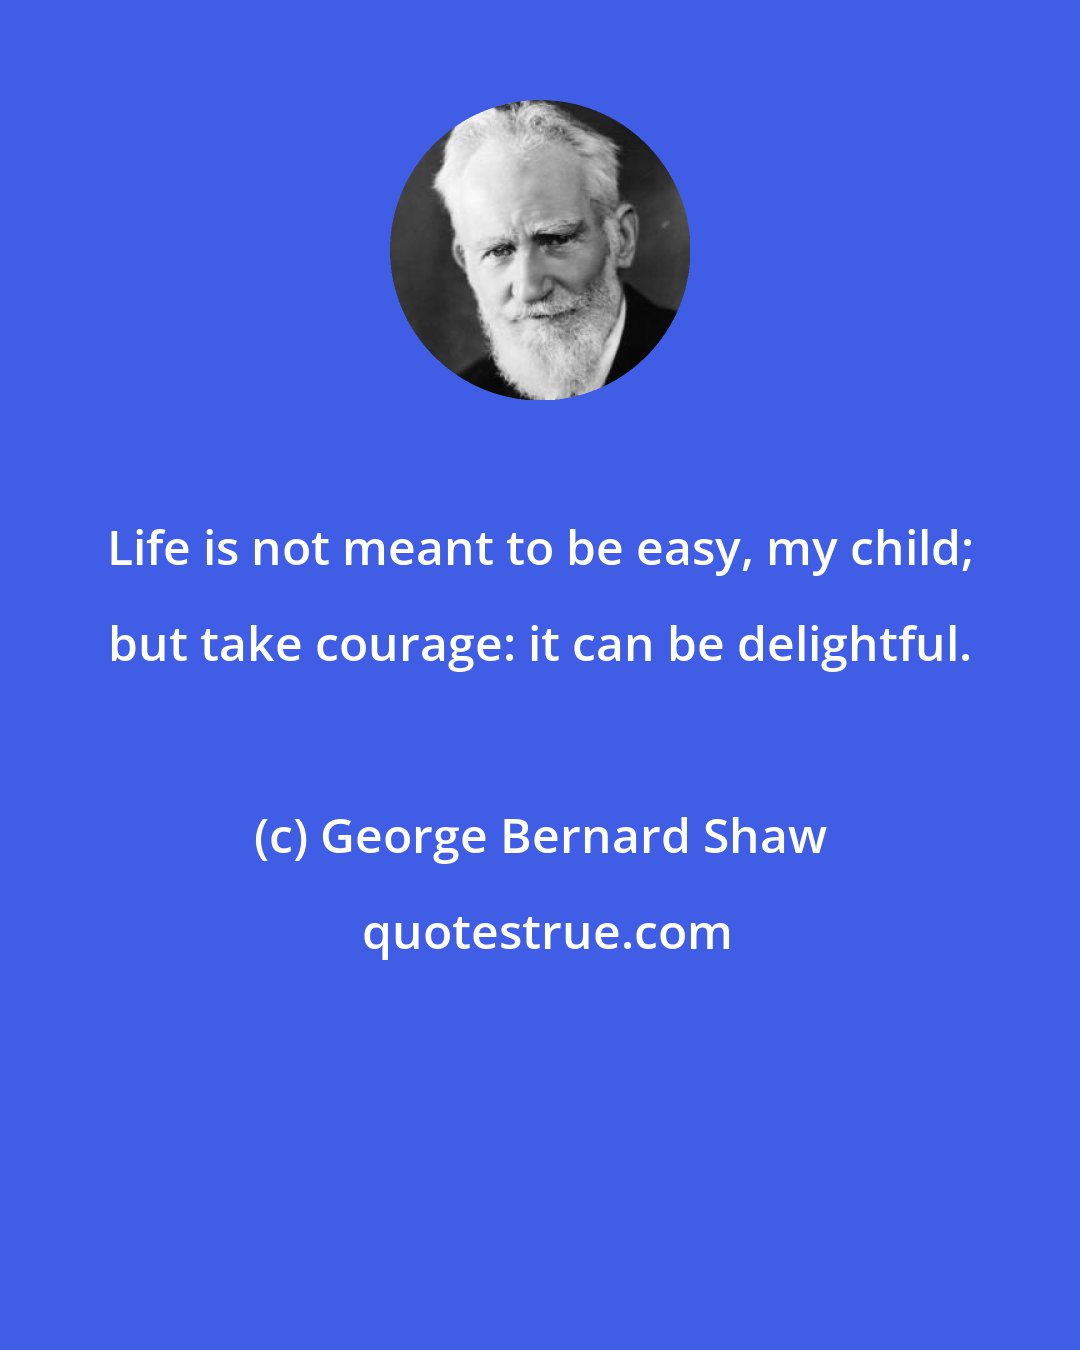 George Bernard Shaw: Life is not meant to be easy, my child; but take courage: it can be delightful.